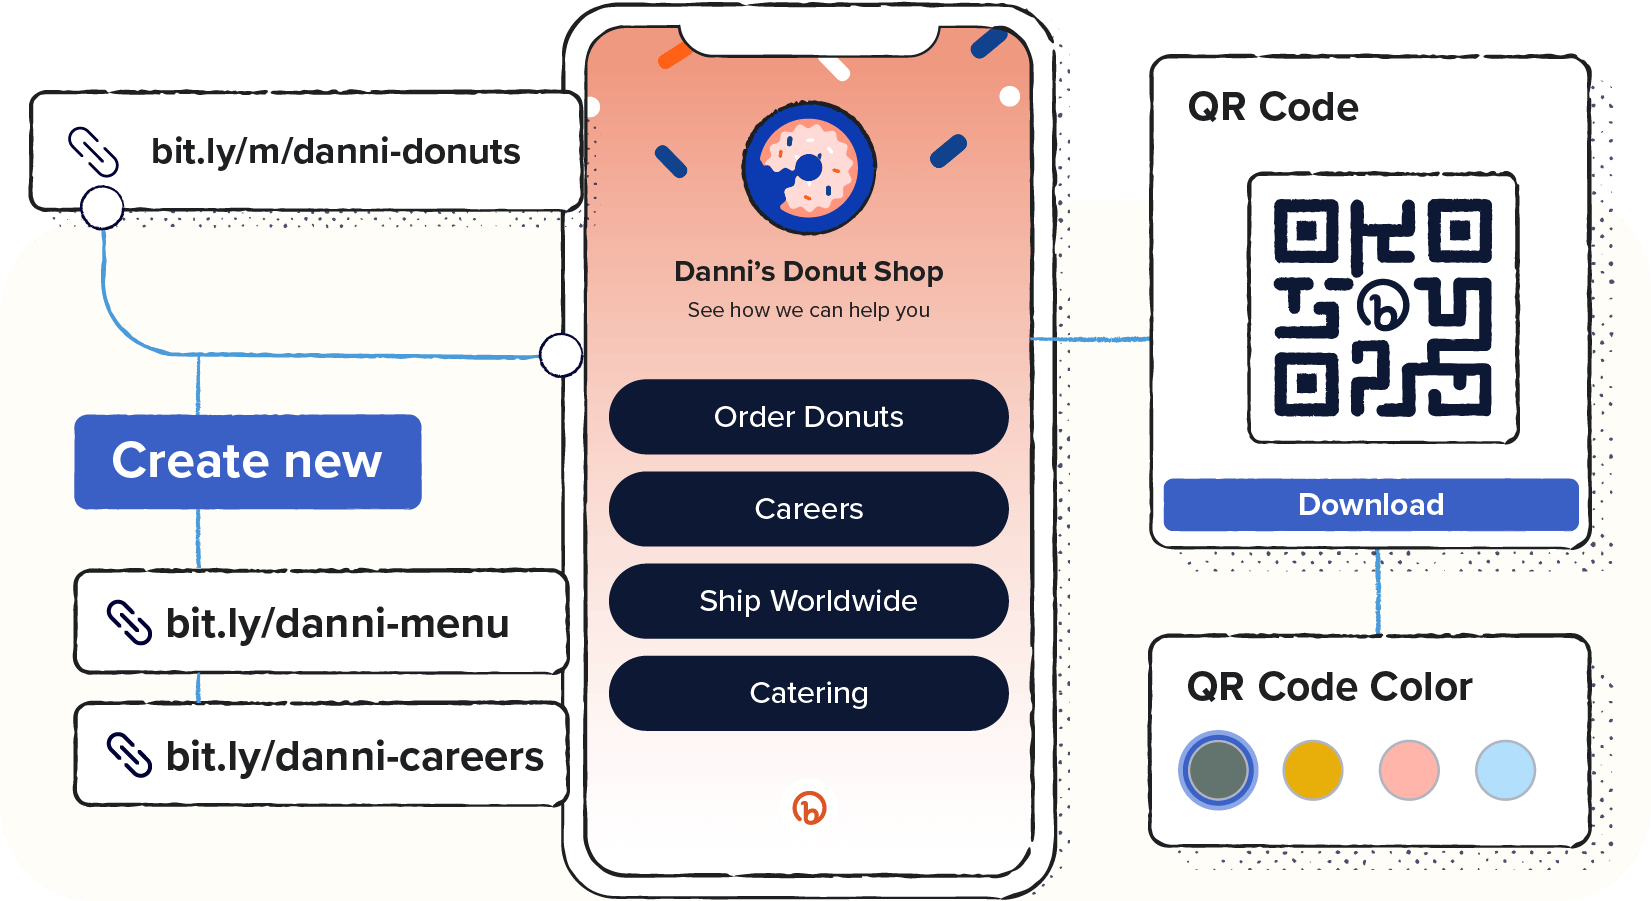 Bitly's Link-in-bio interface on a smartphone displays Danni's Donut Shop's drop-down menu, shortened links, and a QR Code with three featured colors.